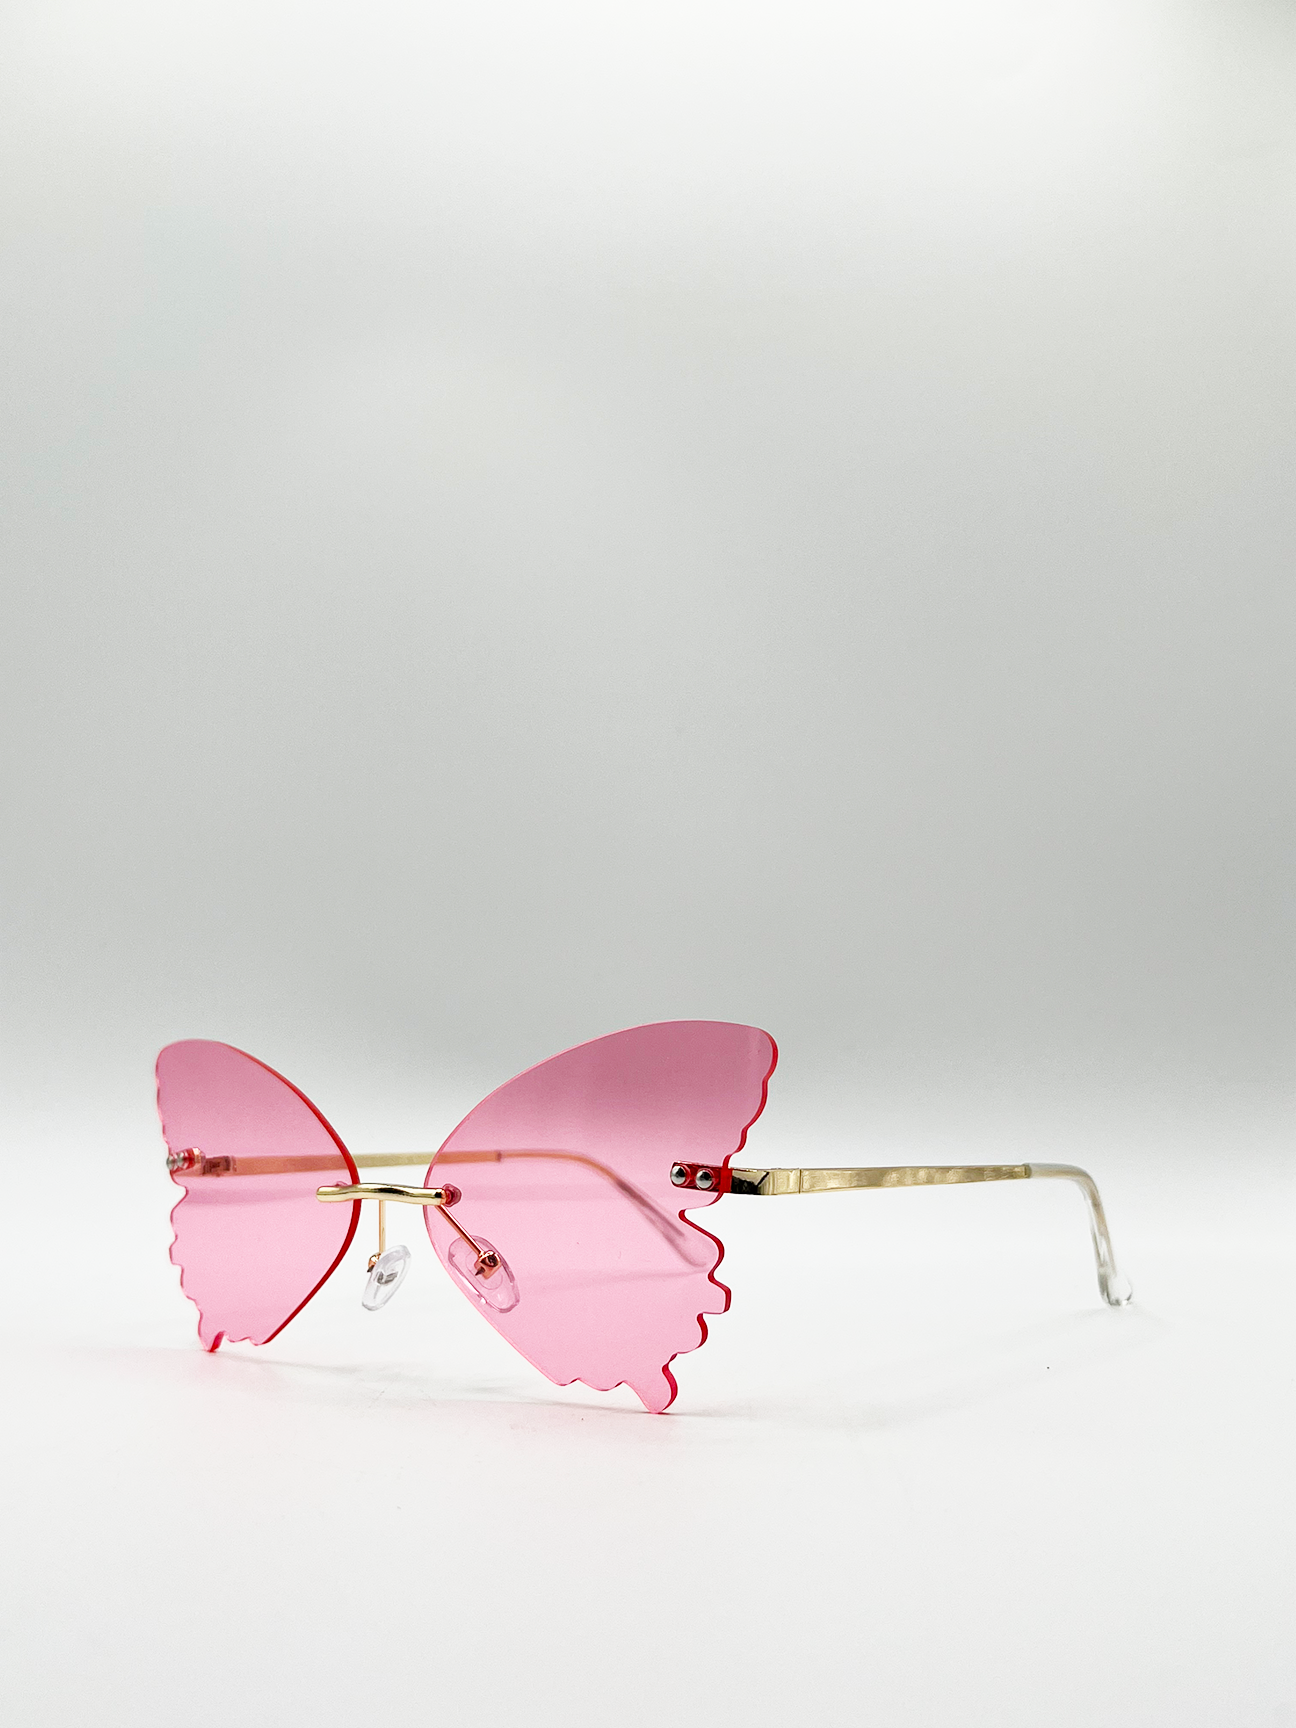 Frameless Pink Butterfly Sunglasses with Metal Arms